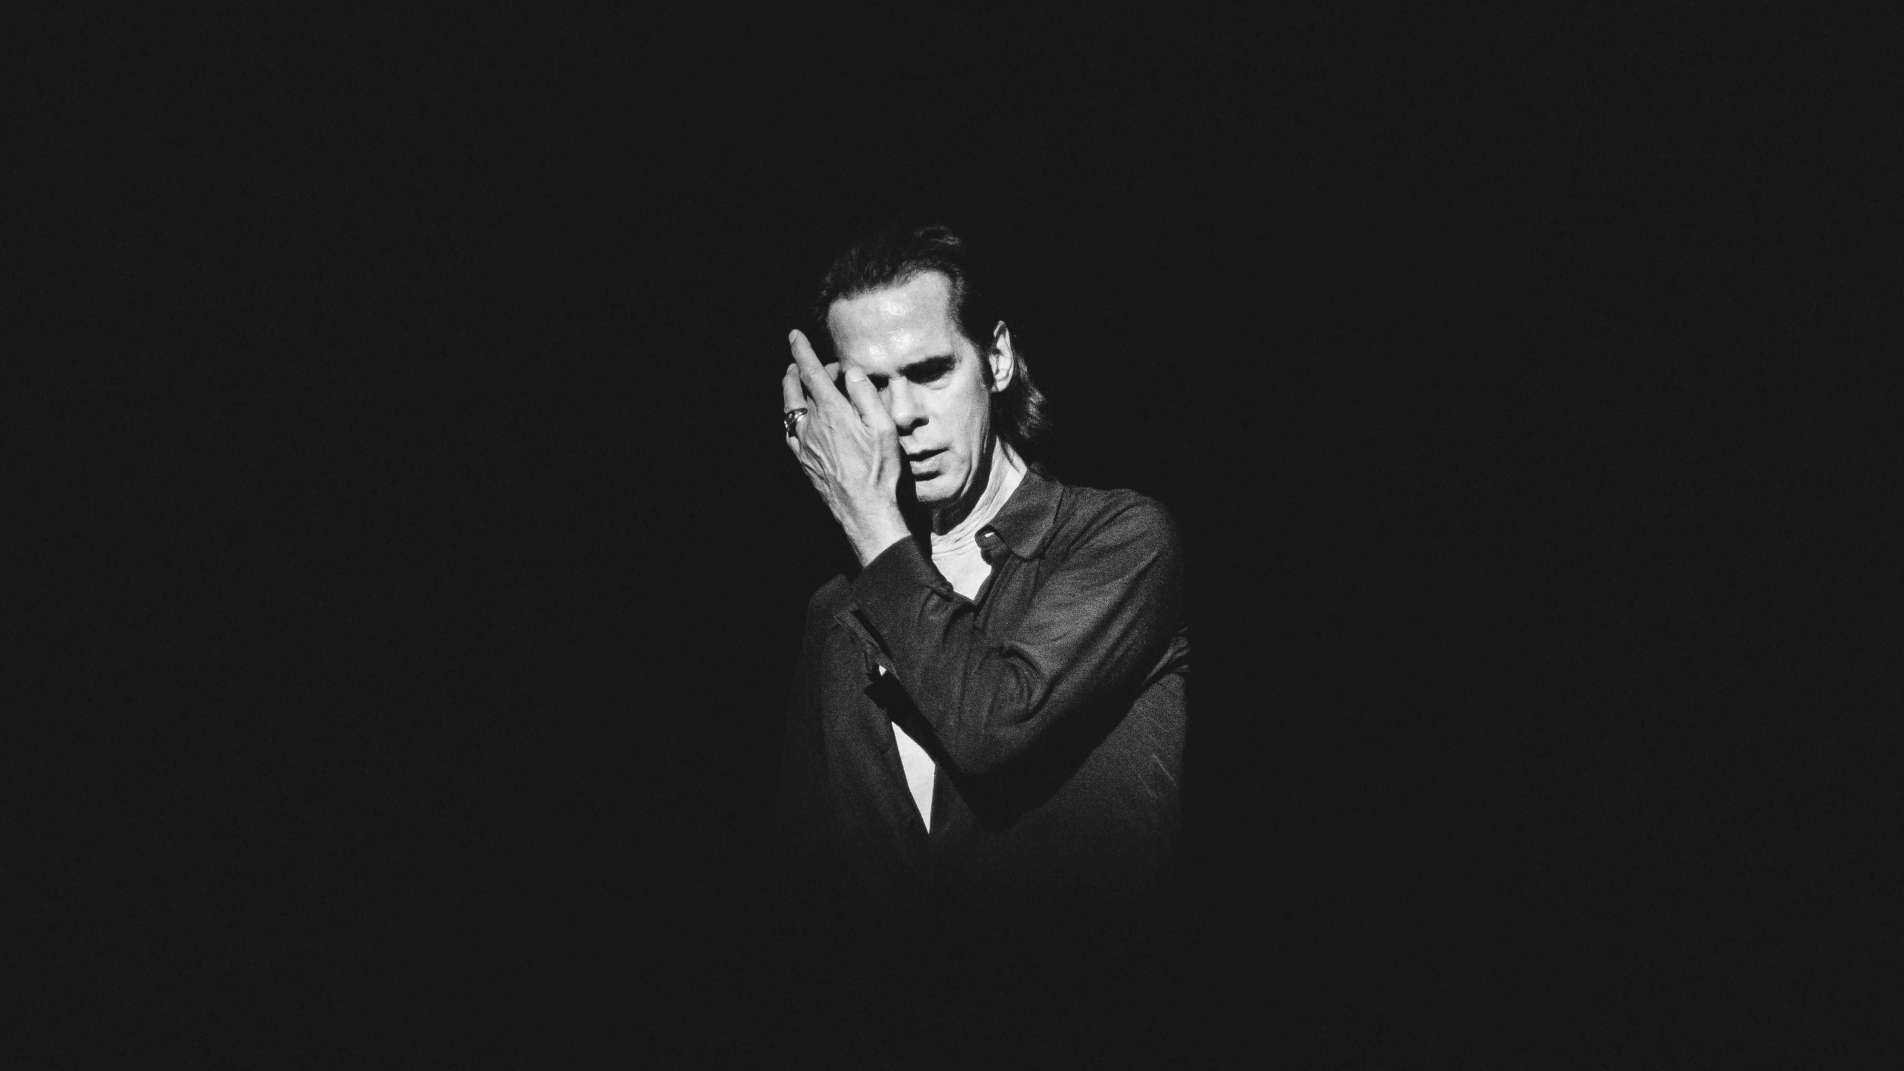 stranger than kindness by nick cave